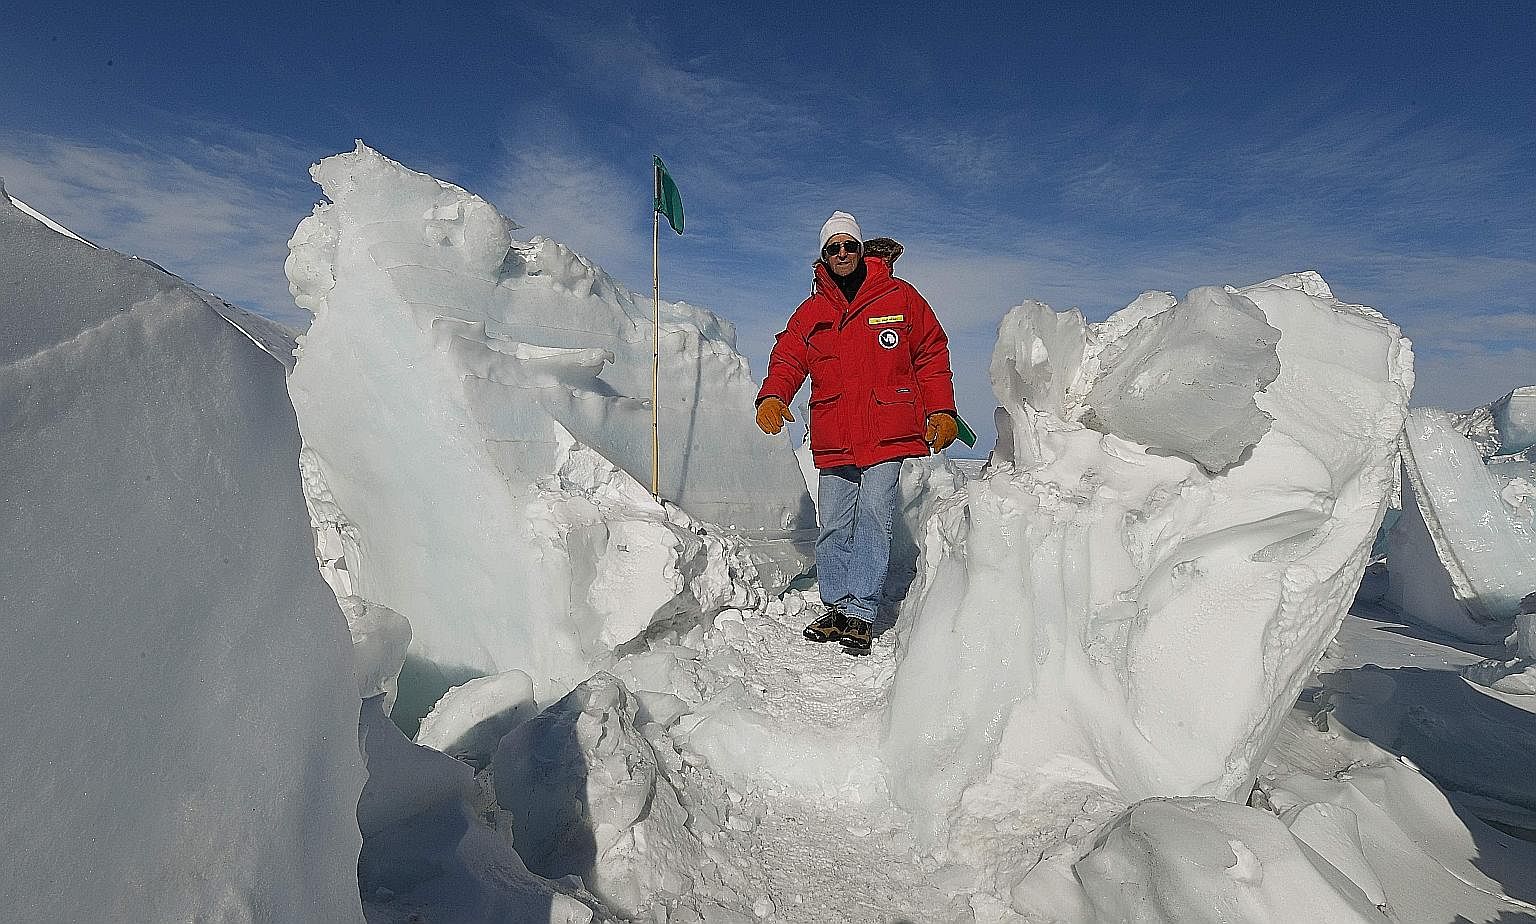 Mr Kerry on a frozen section of the Ross Sea near Antarctica's McMurdo Station on Saturday. On climate change, he said "we will wait to see how the next administration addresses this". Mr Trump at a rally in South Carolina in February. During campaig